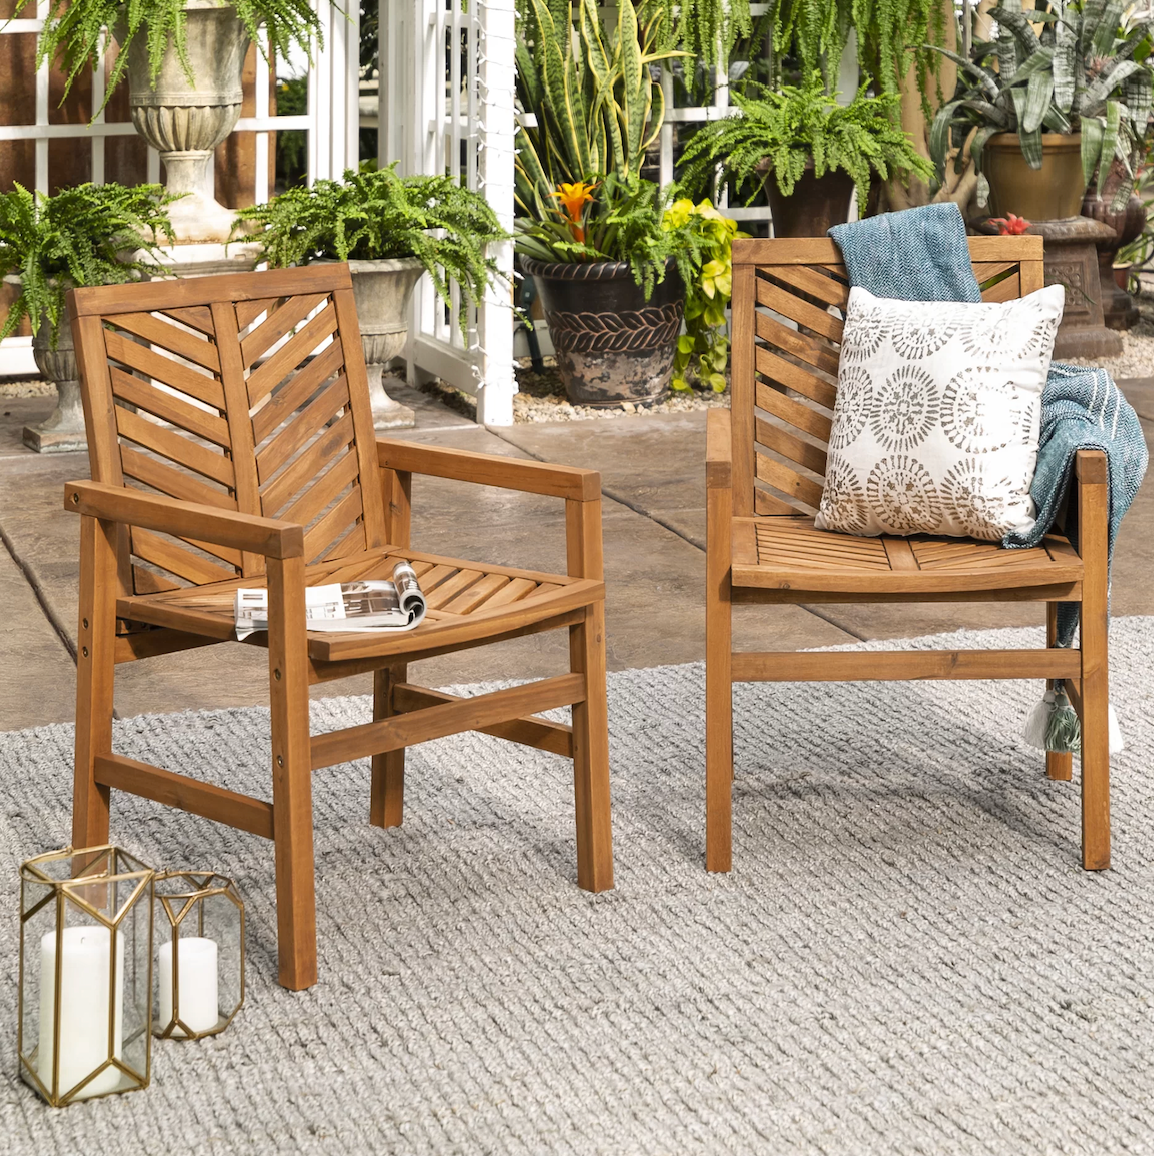 Frontgate: Save on outdoor pieces, furniture and clearance items